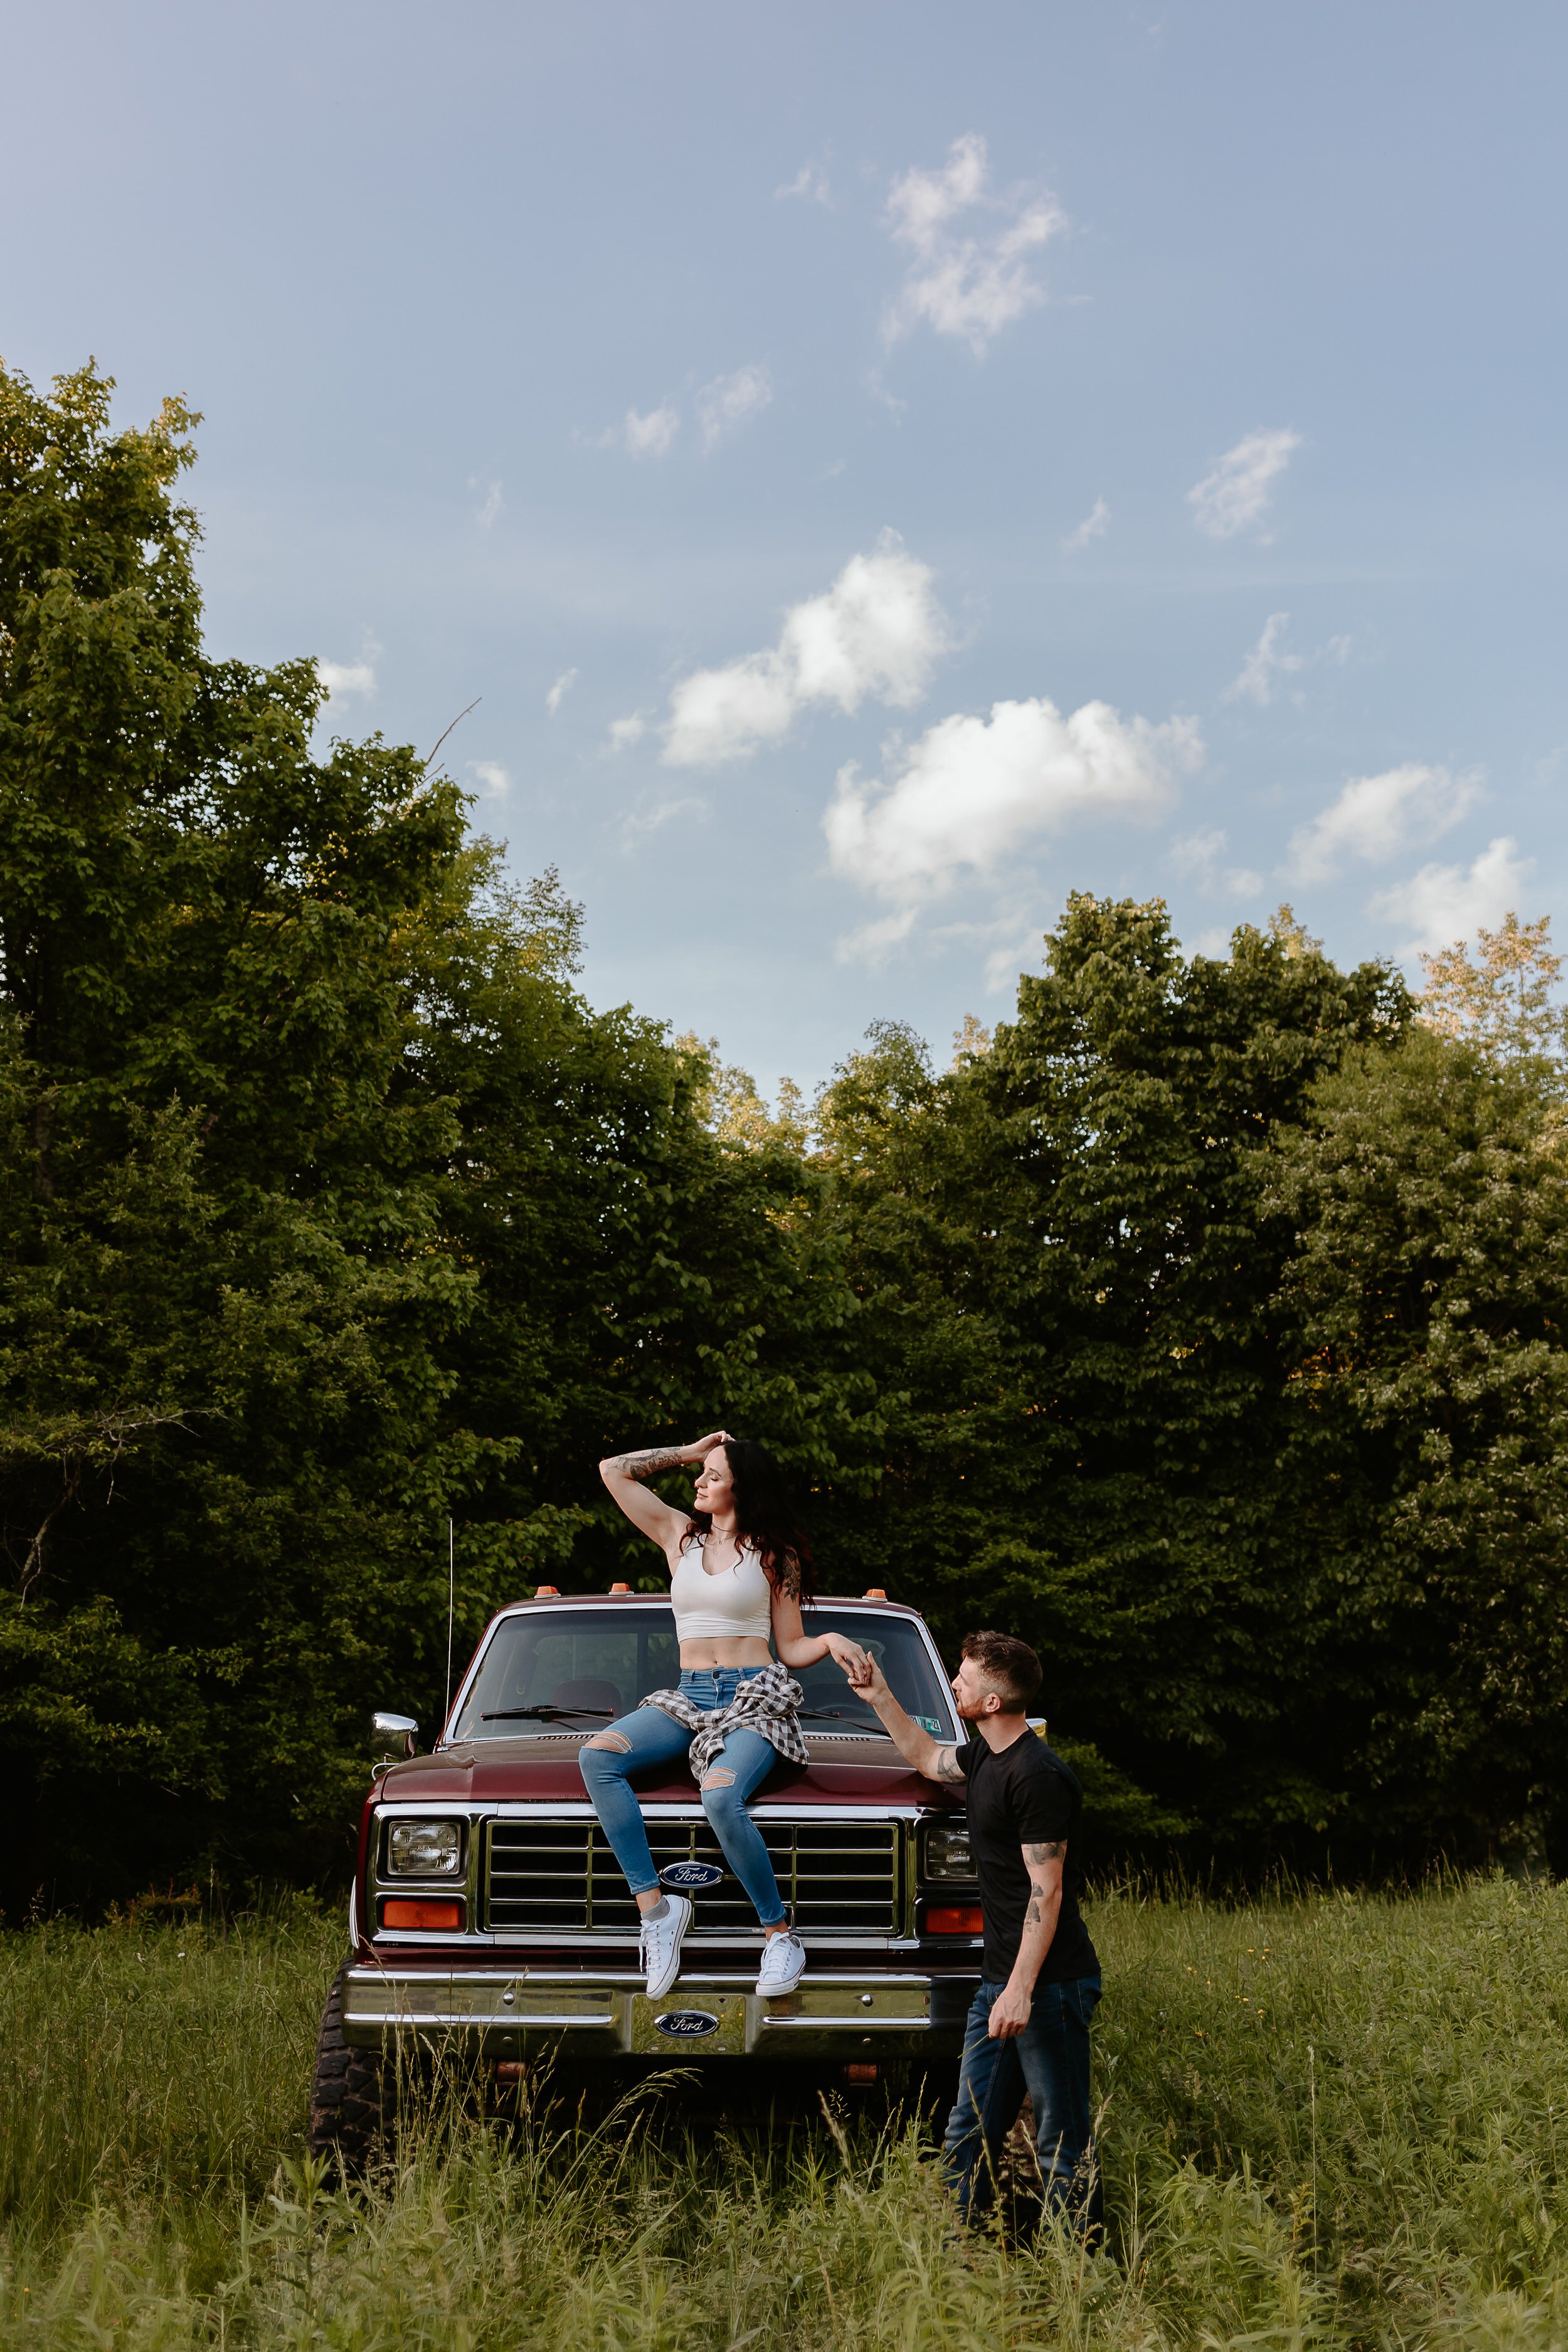 Woman sits on hood truck while fiancé holds her hand.